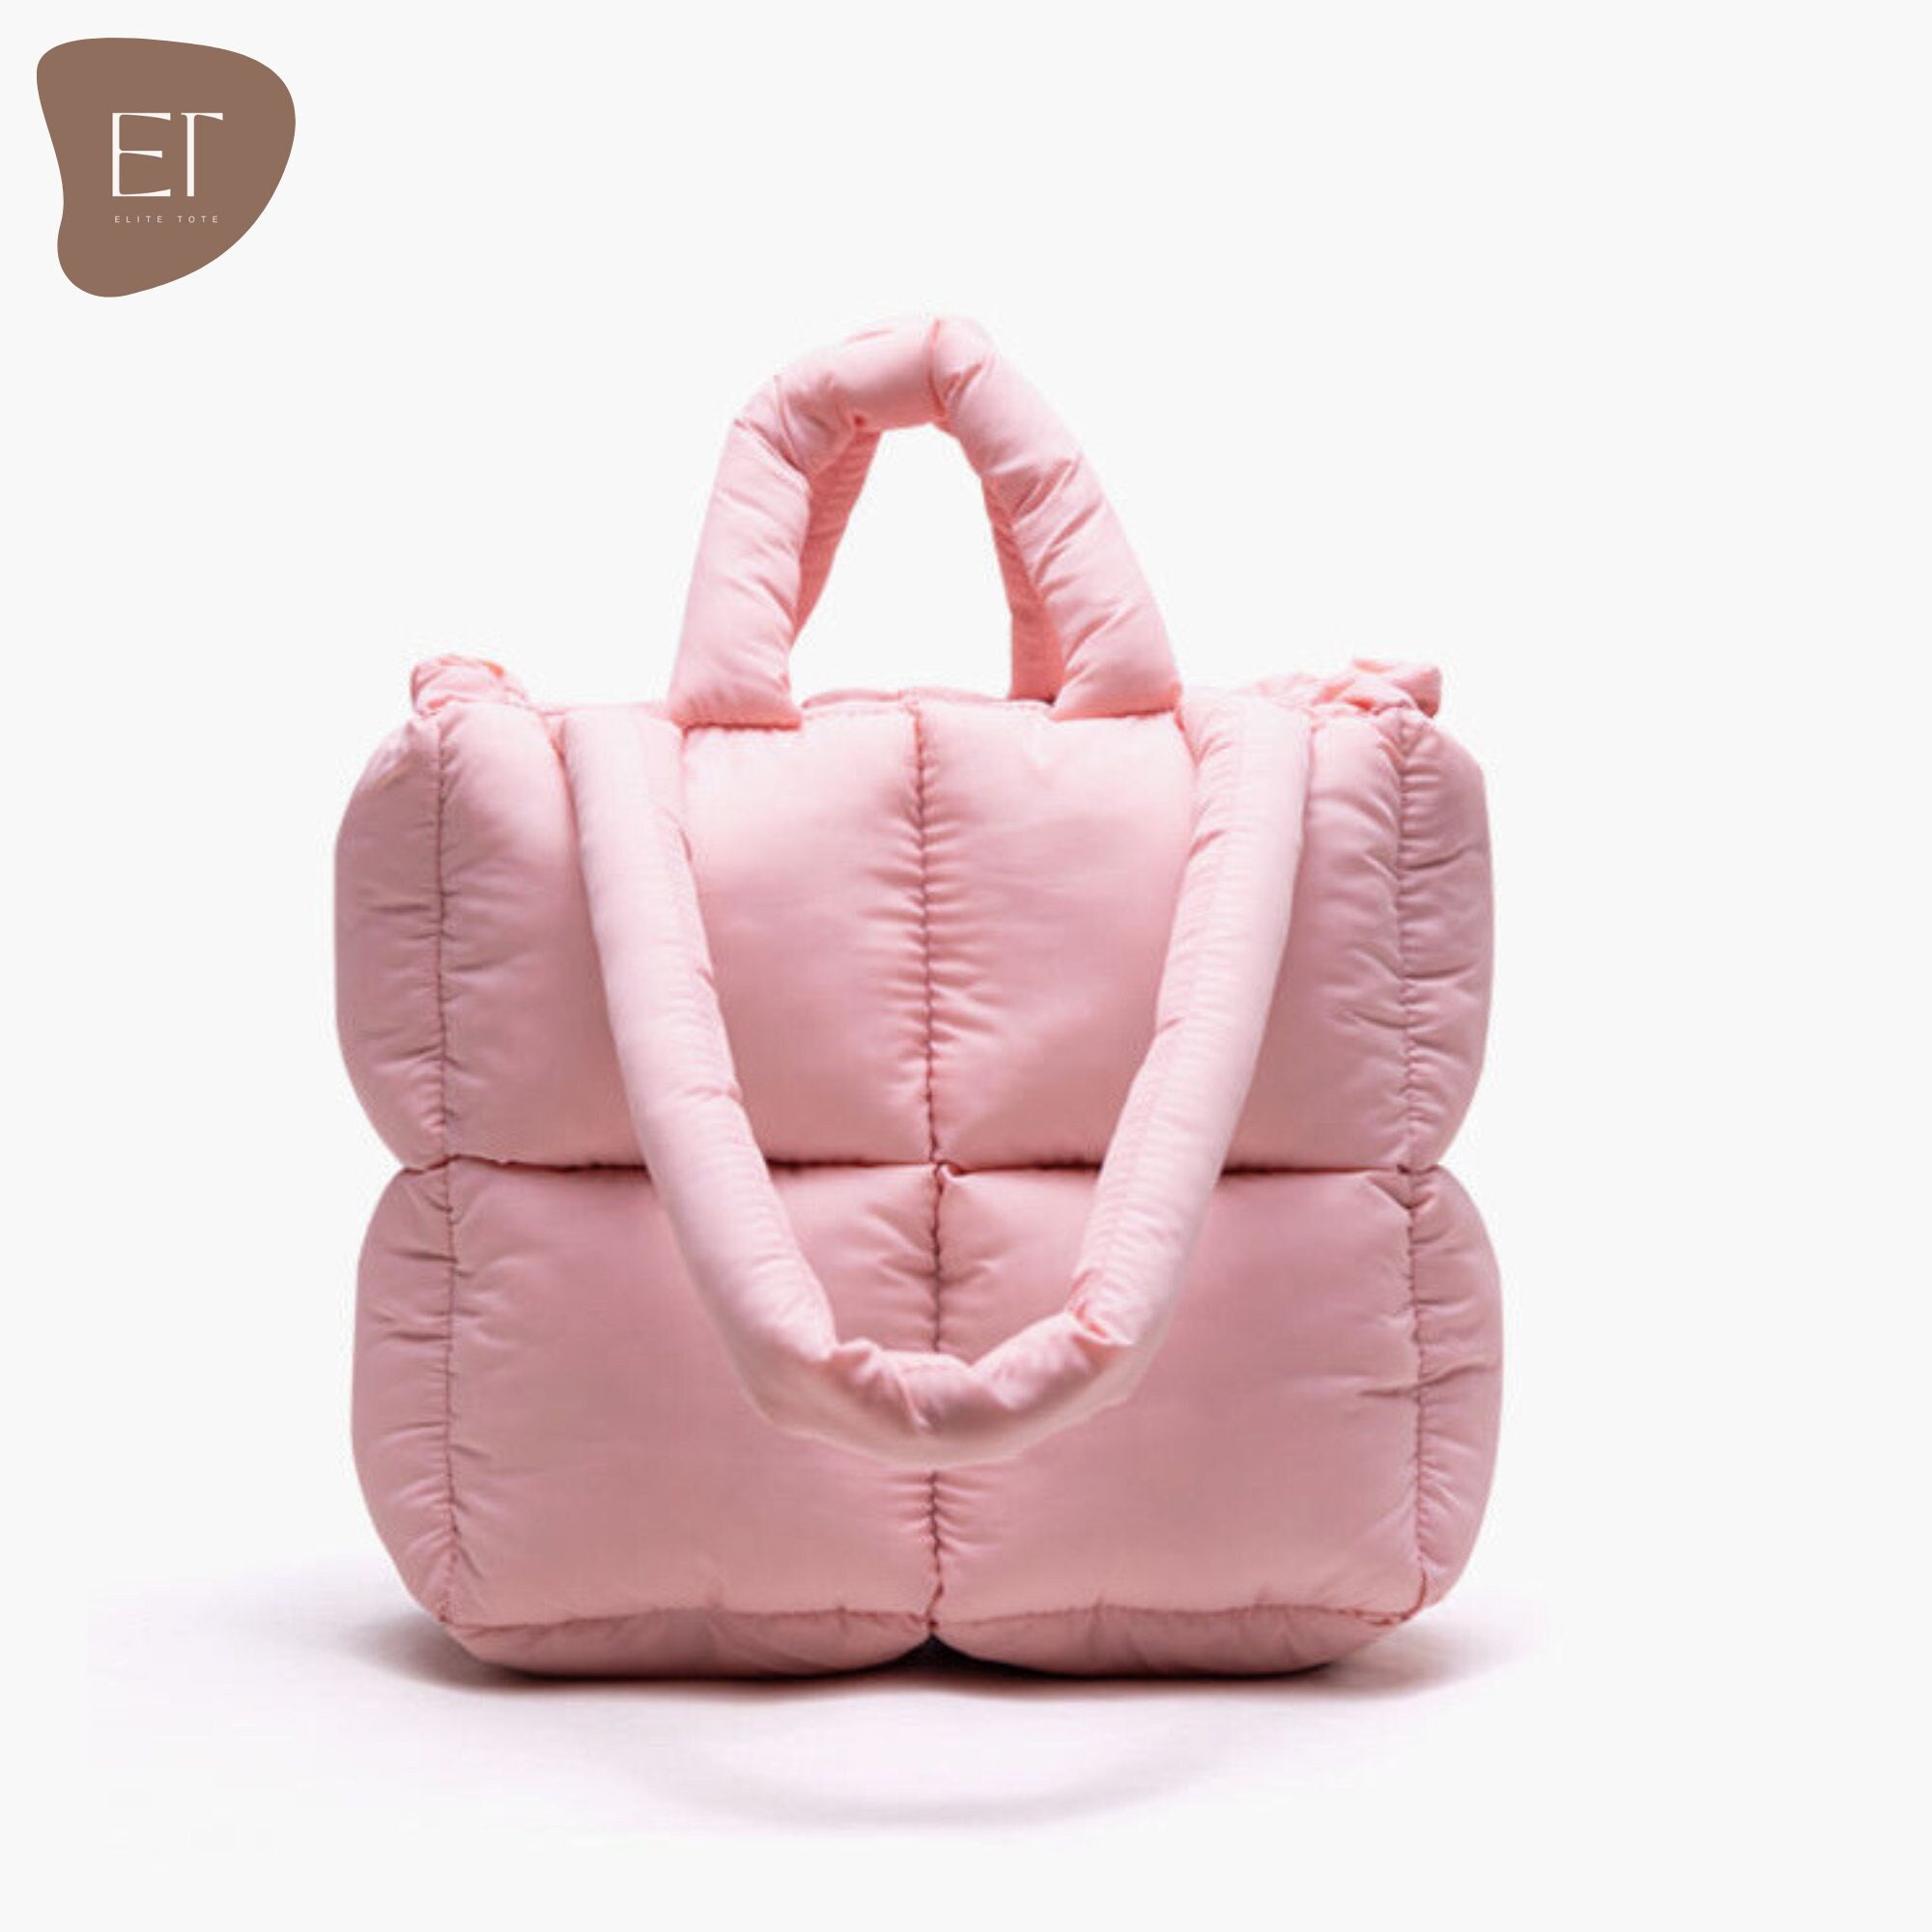 Pillow Puffer Tote in Pink, Quilted Bag, Nylon Shoulder Bag, Crossbody ...